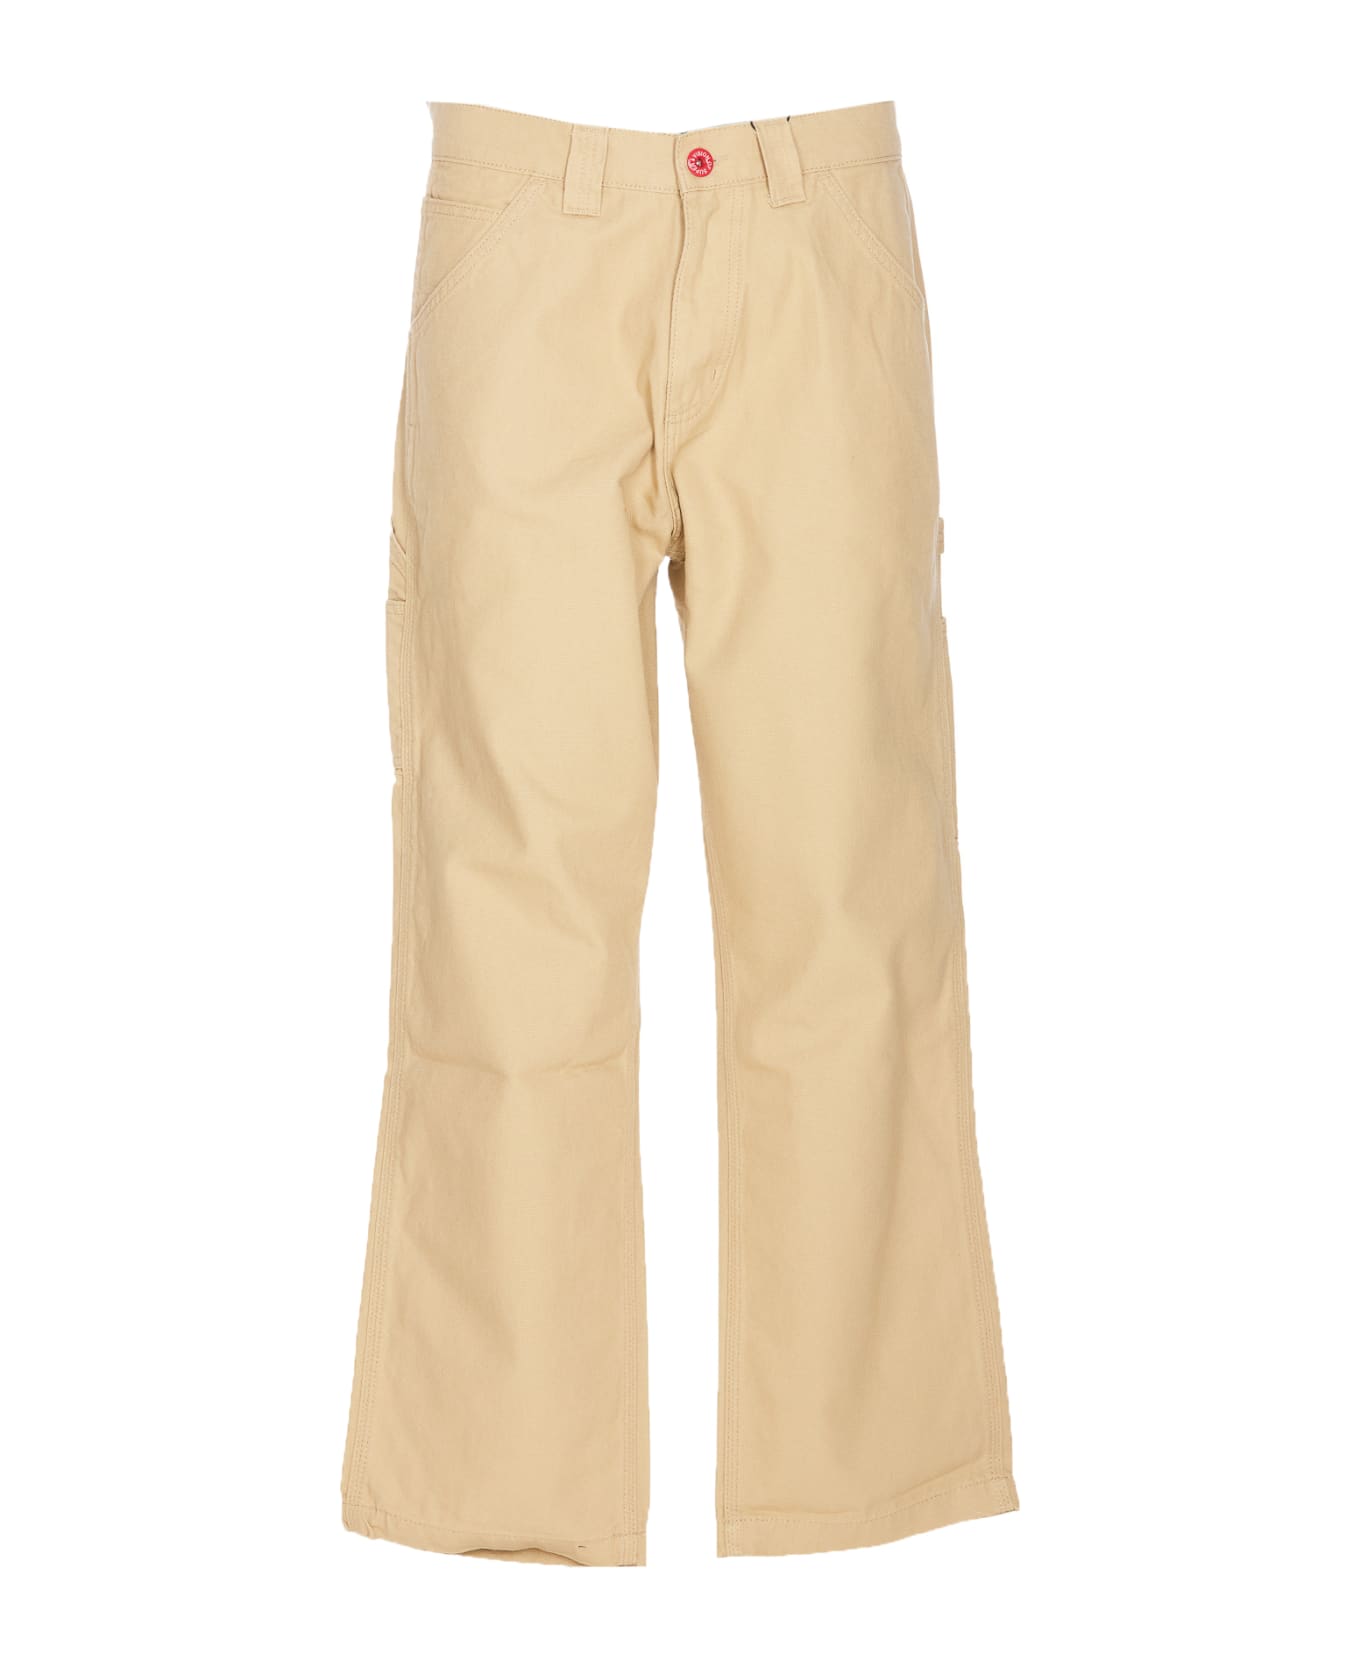 Vision of Super Sand Worker Pants With V-s Gothic Patches - NEUTRALS